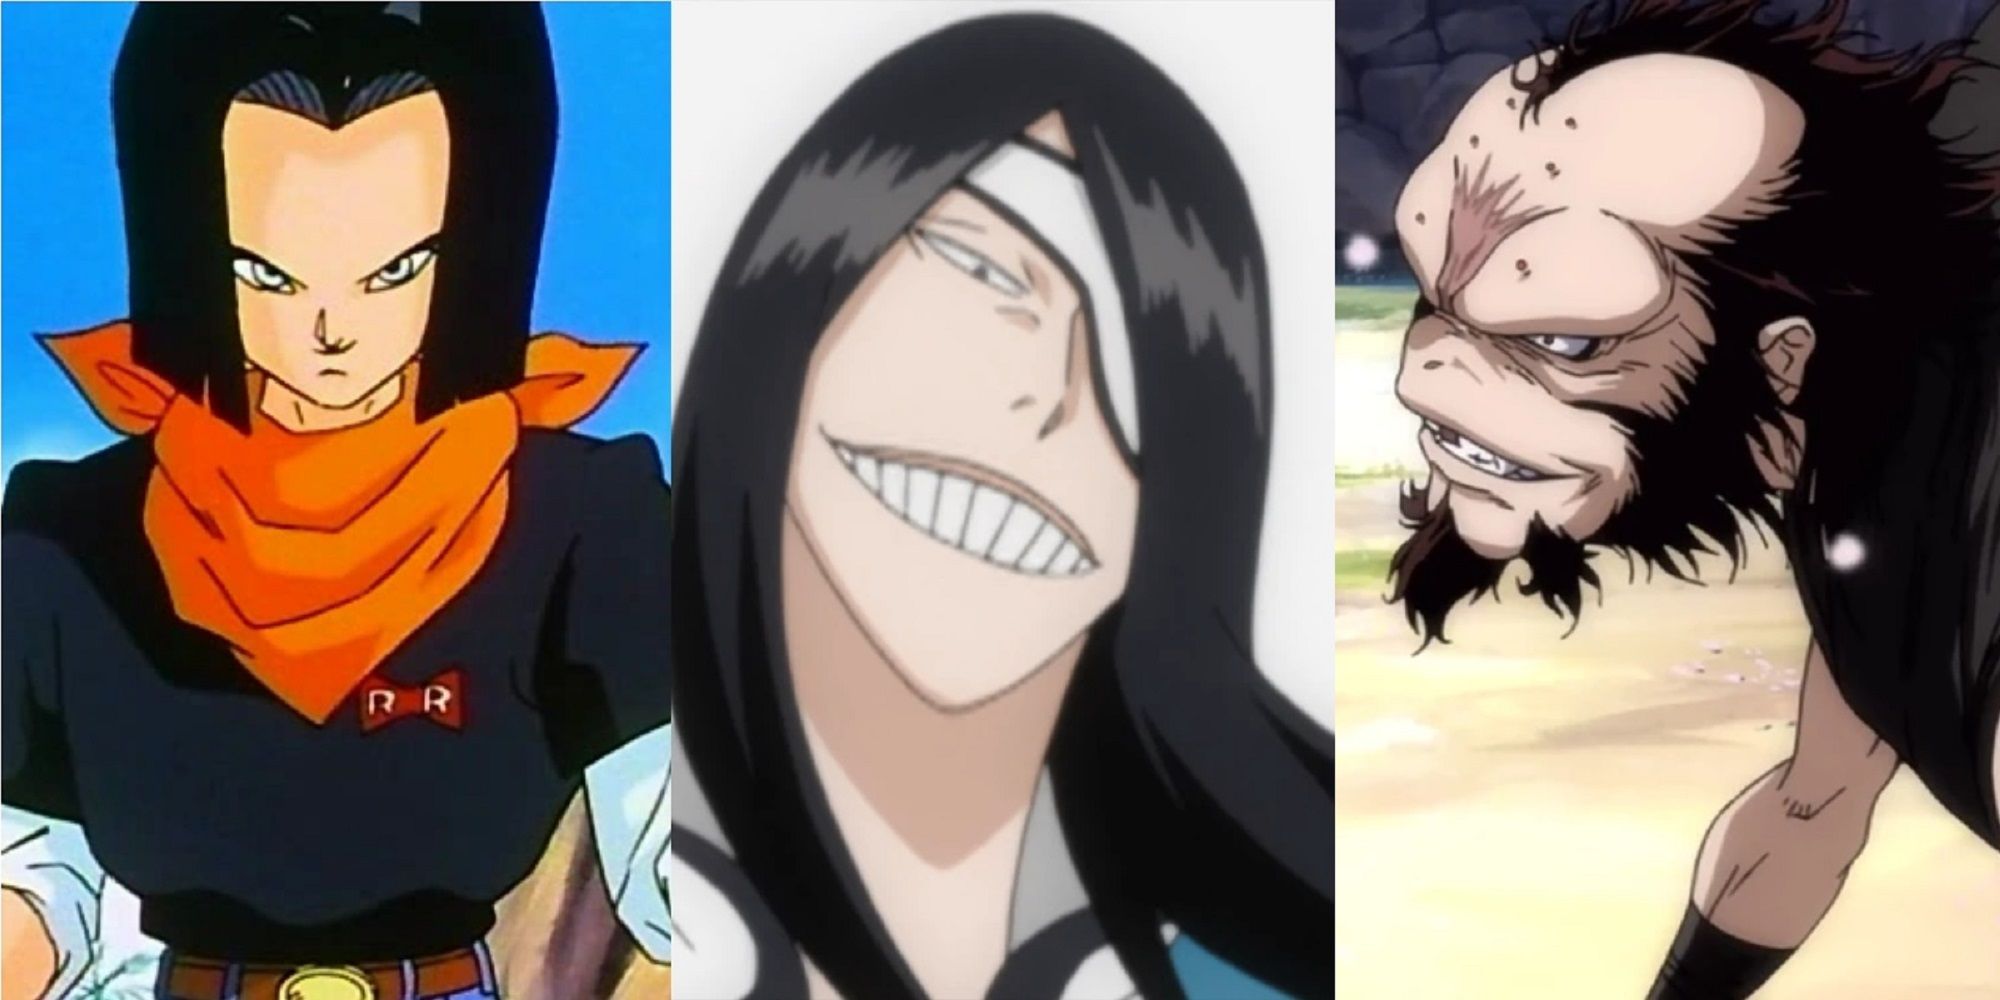 Split image of Android 17 preparing to fight Piccolo in Dragon Ball Z, Nnoitra smiling in Bleach, and Shogen facing his opponent in Basilisk The Kouga Ninja Scrolls